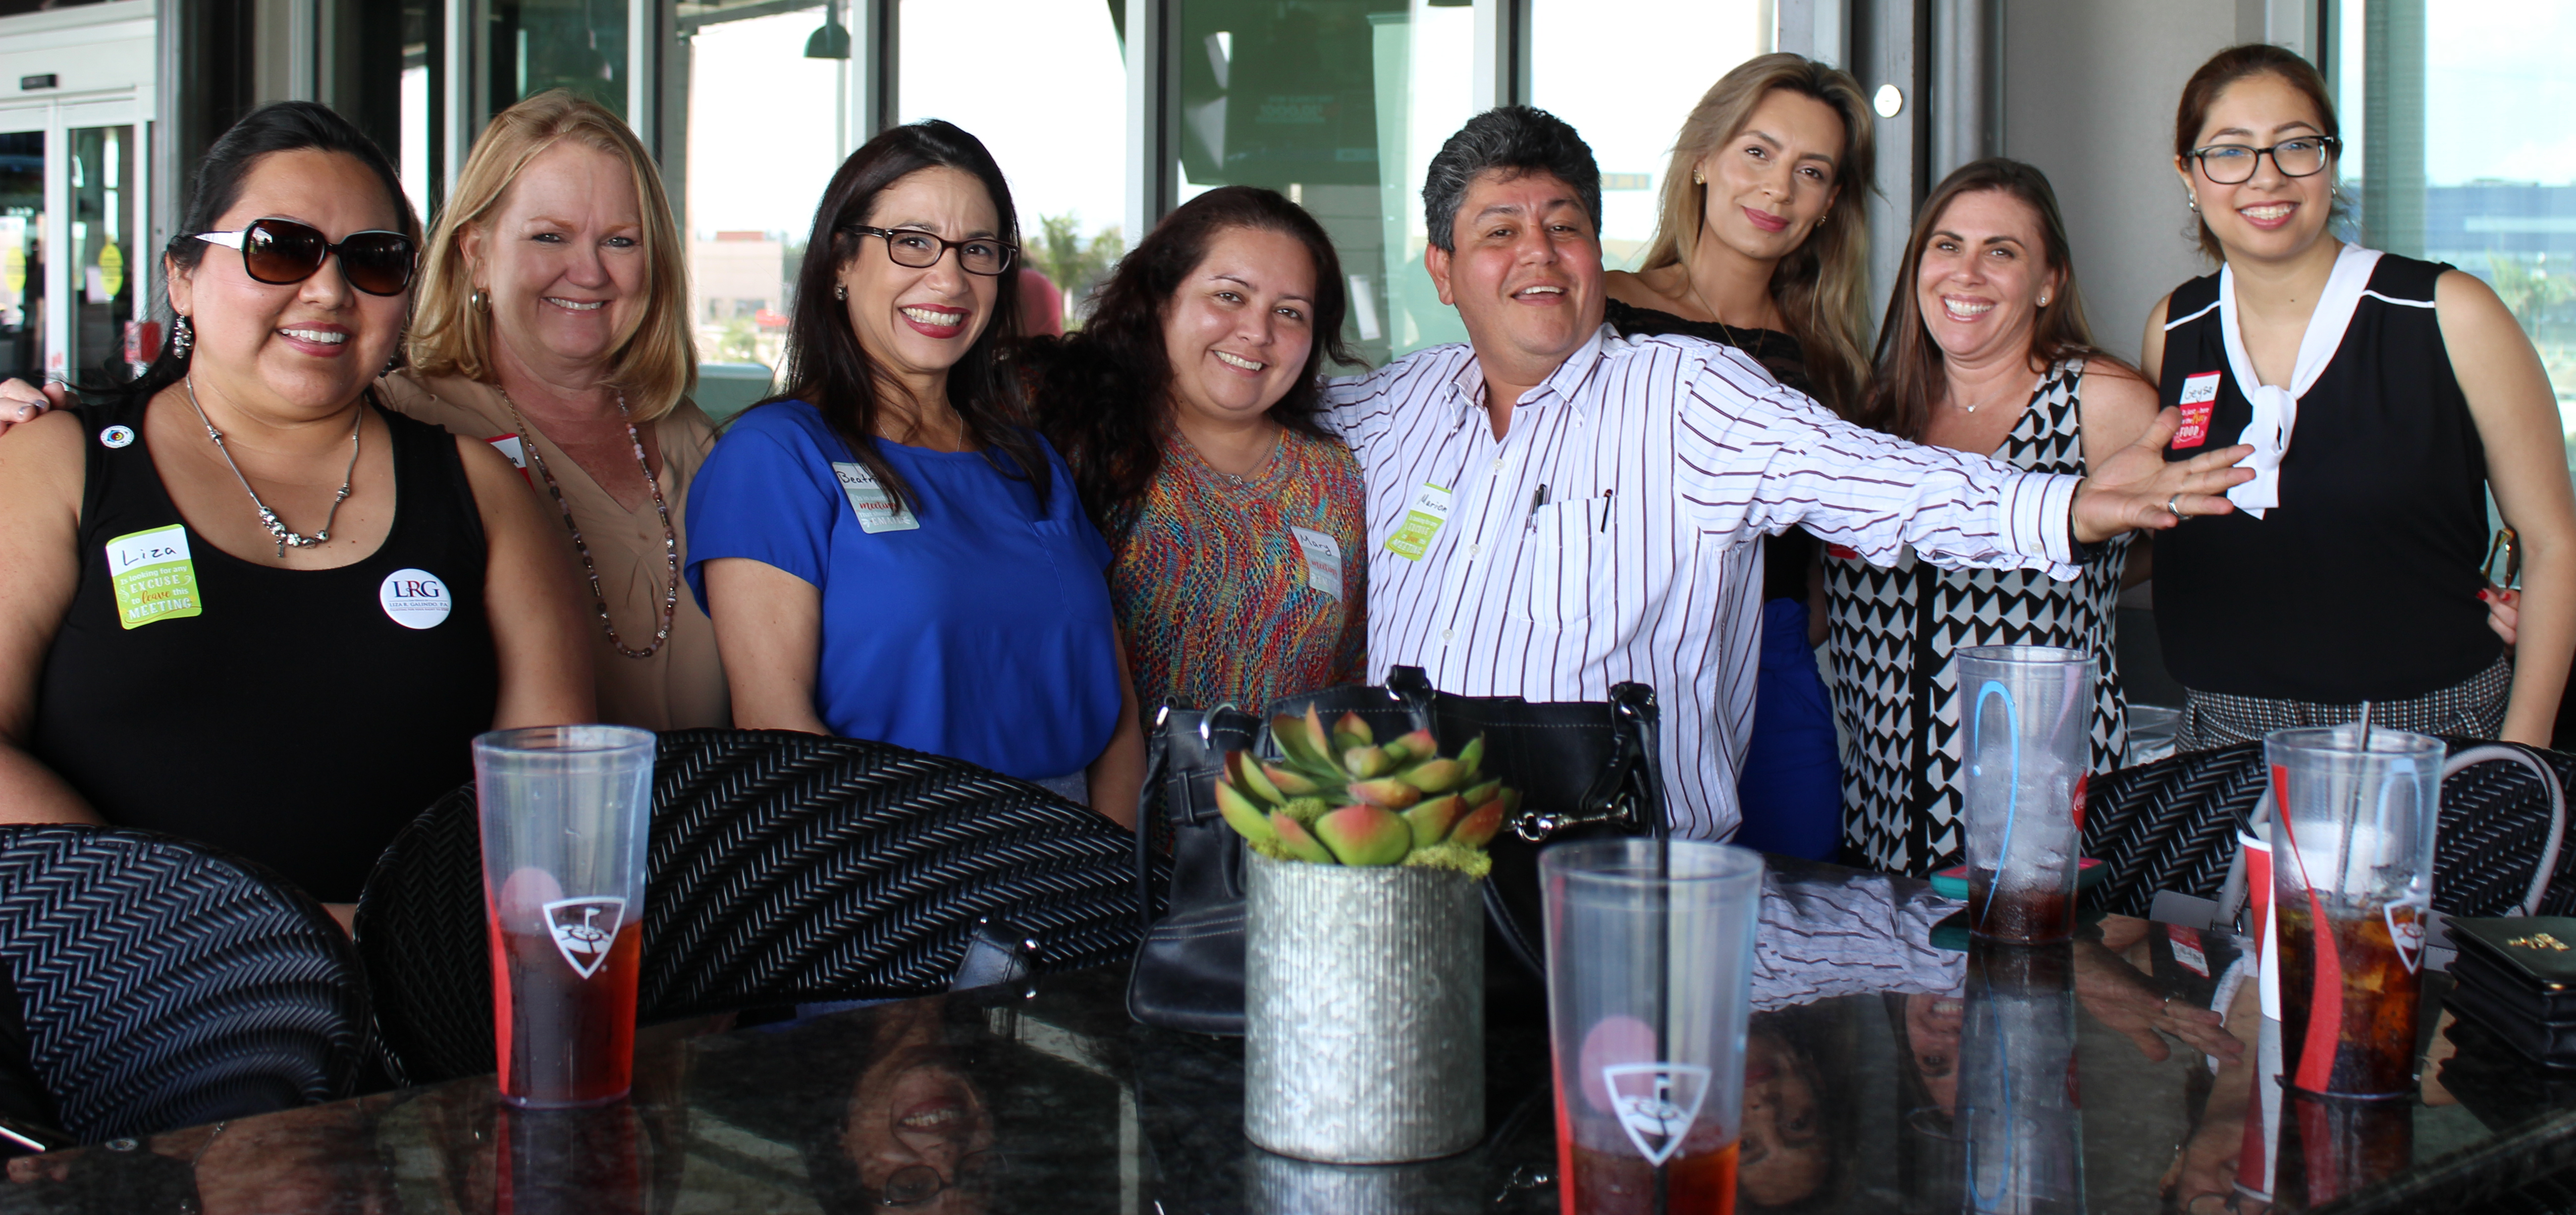 Doral Chamber of Commerce introduces a group photo of many members at Topgolf Doral Networking Luncheon Event.